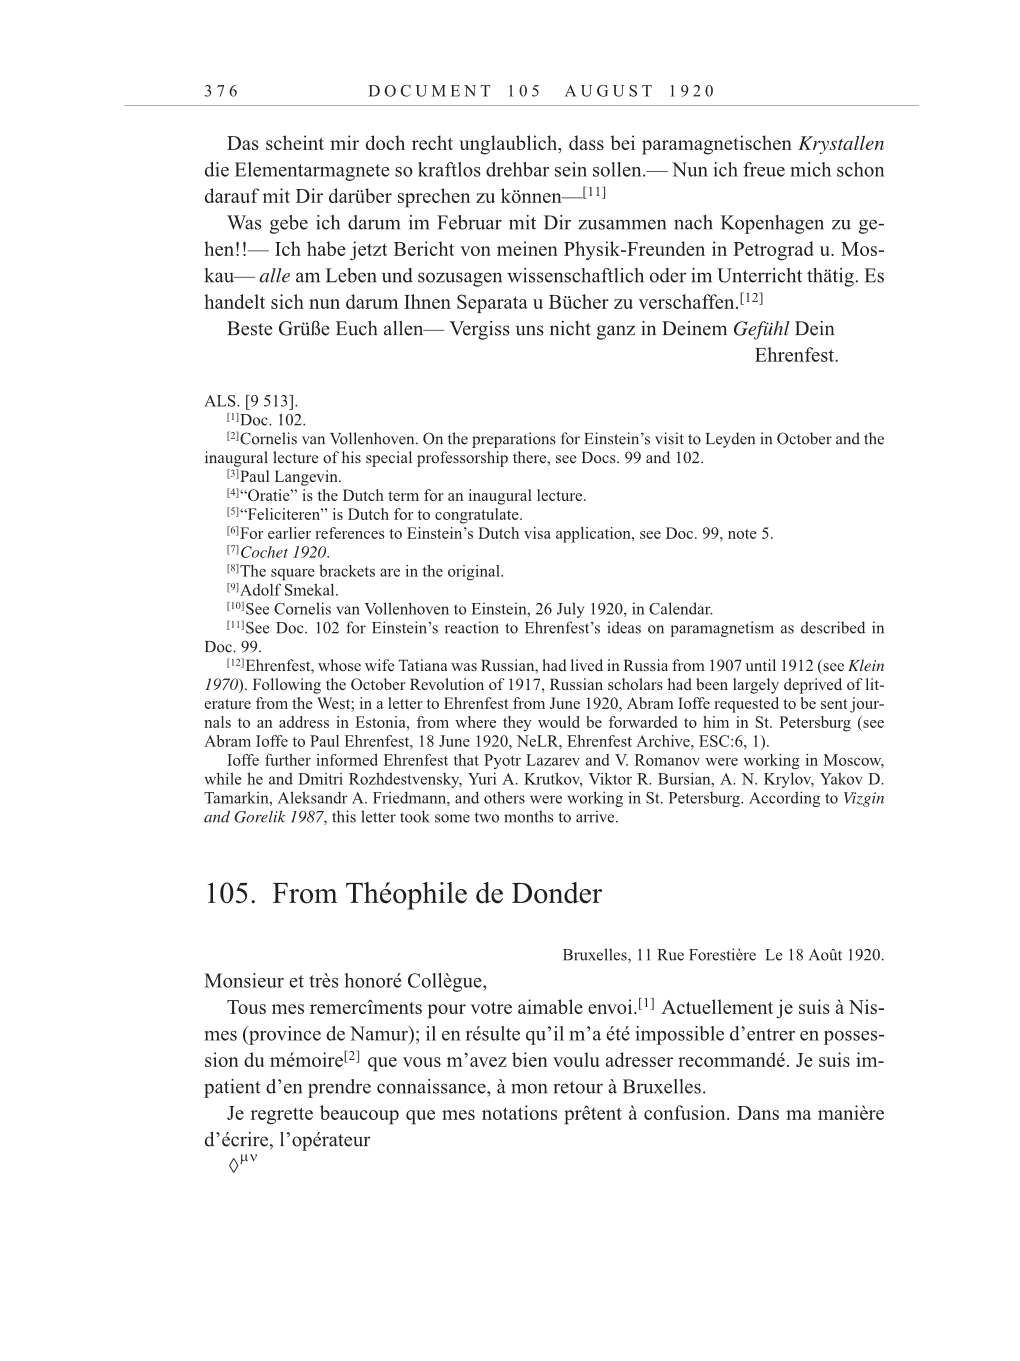 Volume 10: The Berlin Years: Correspondence May-December 1920 / Supplementary Correspondence 1909-1920 page 376